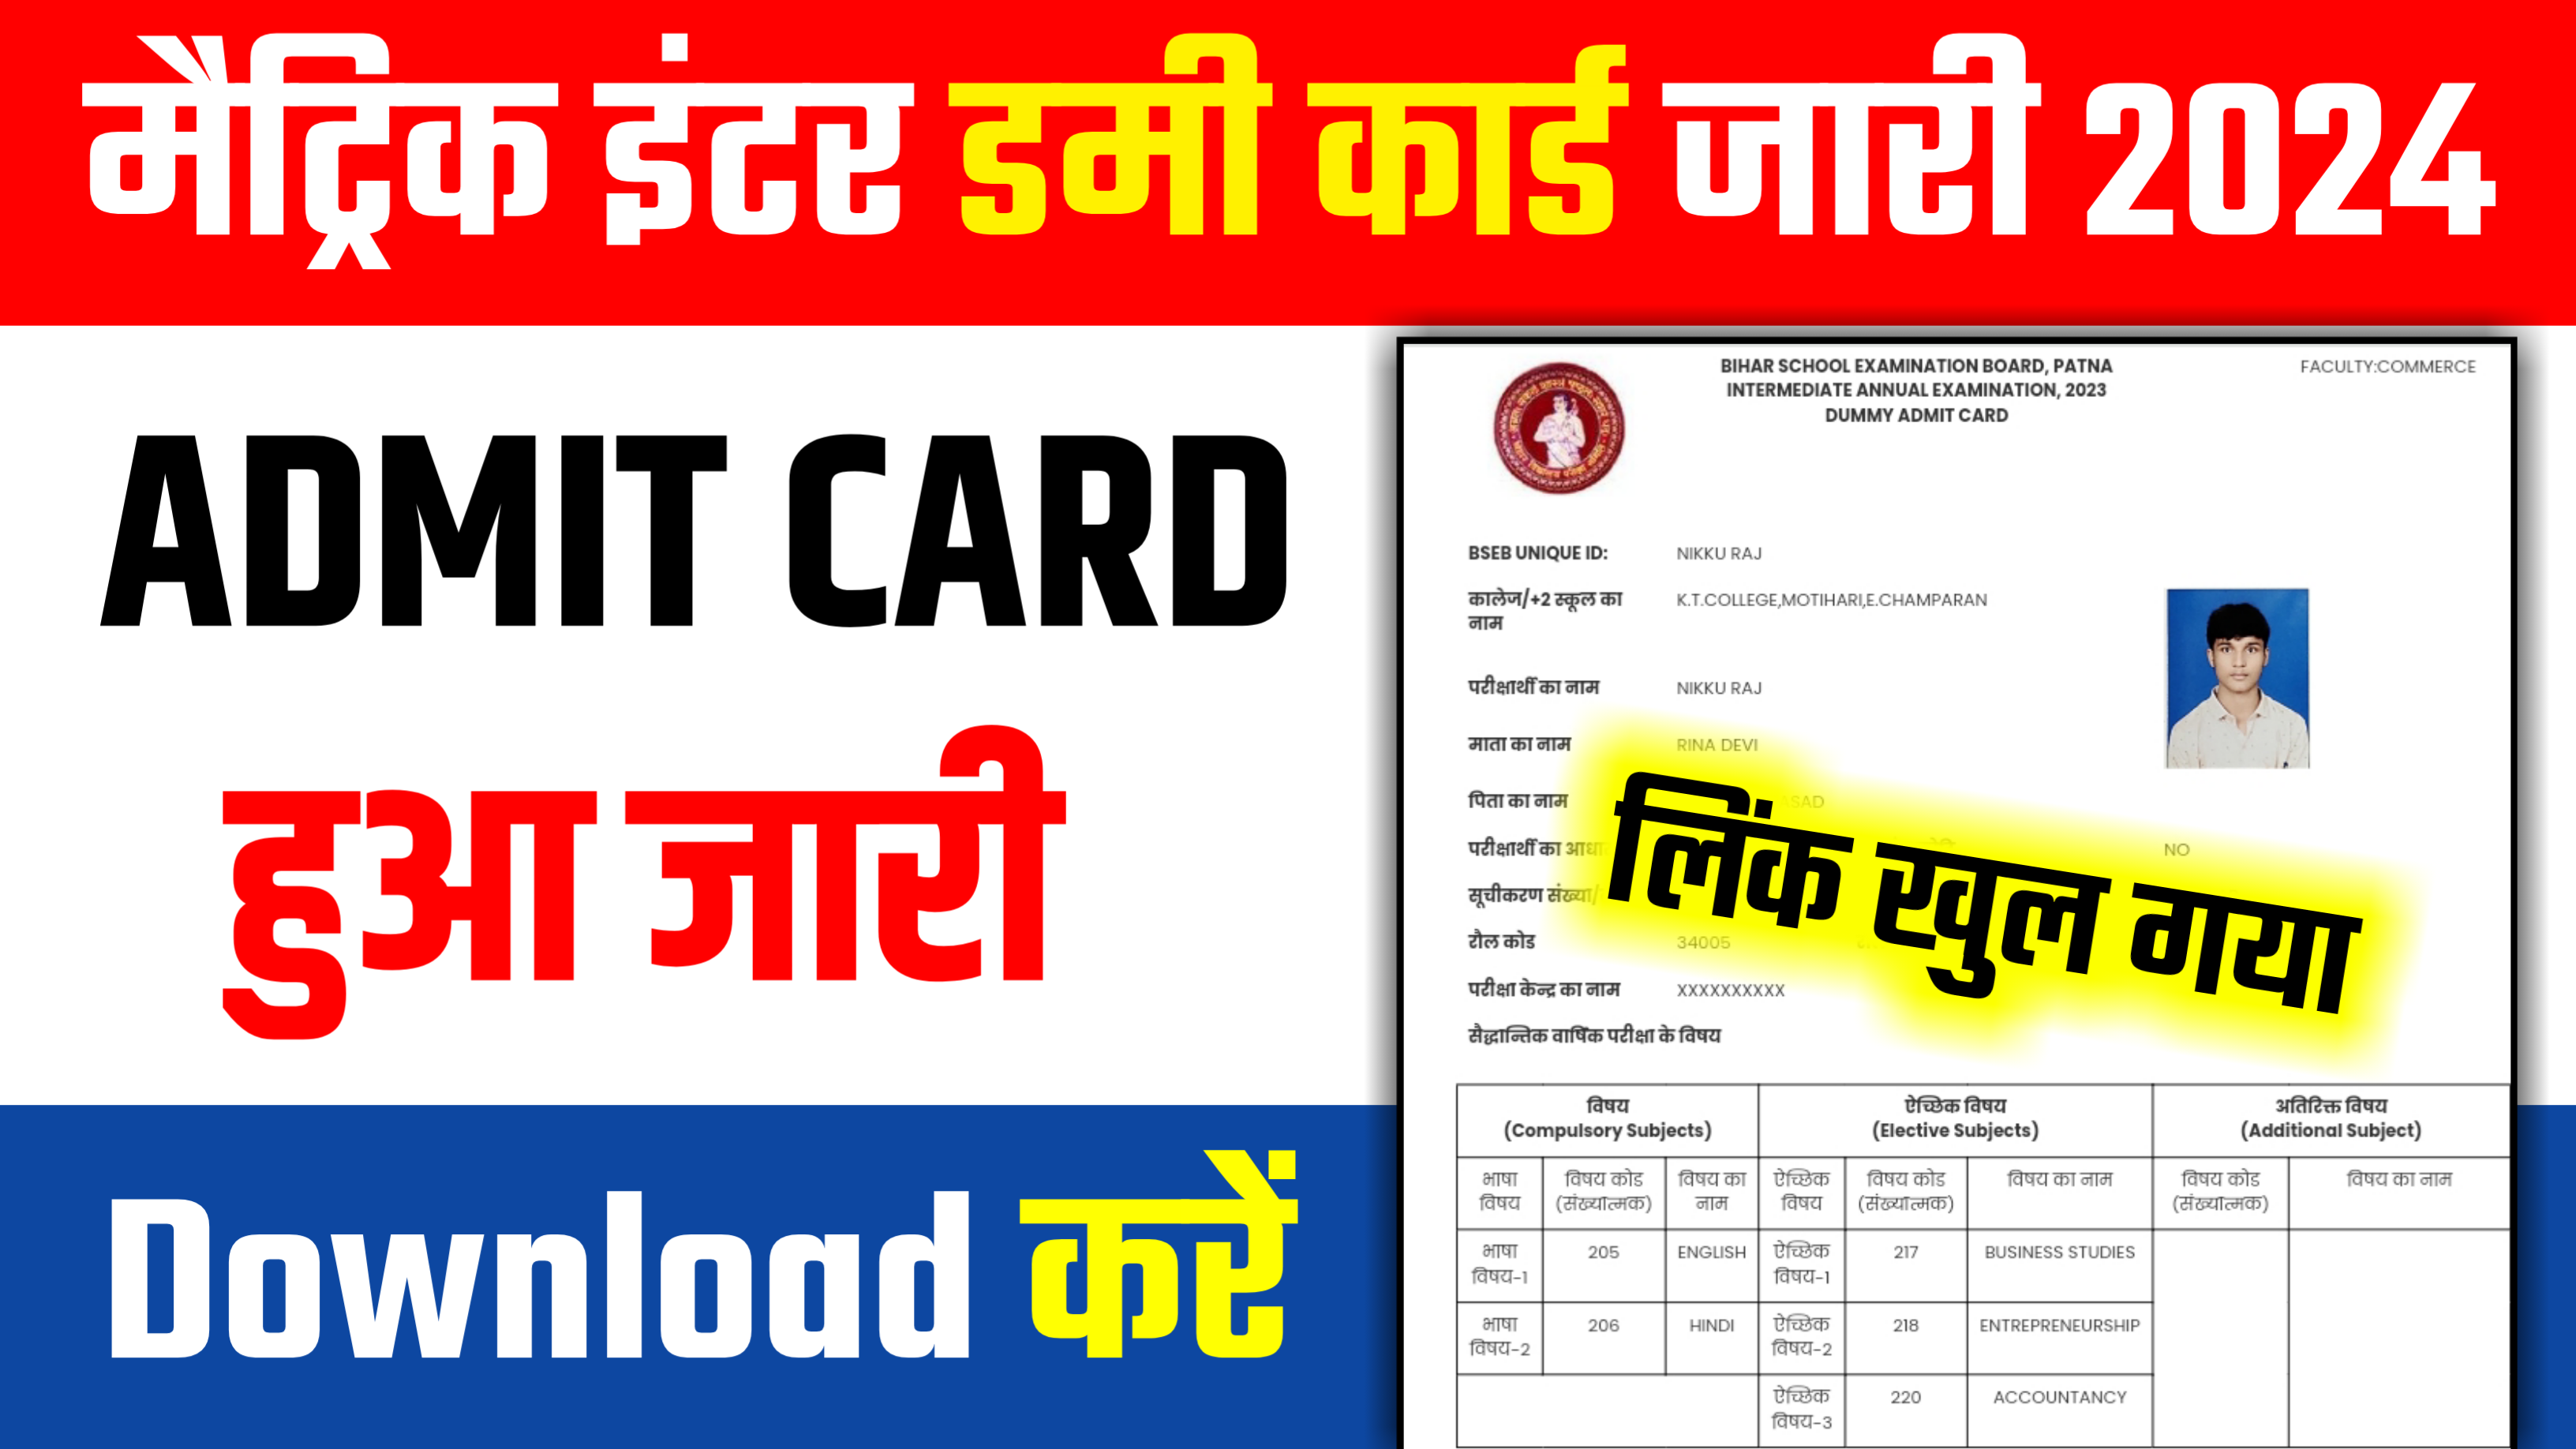 Bsbe Dummy Admit Card 2024 10th 12th Download Now: